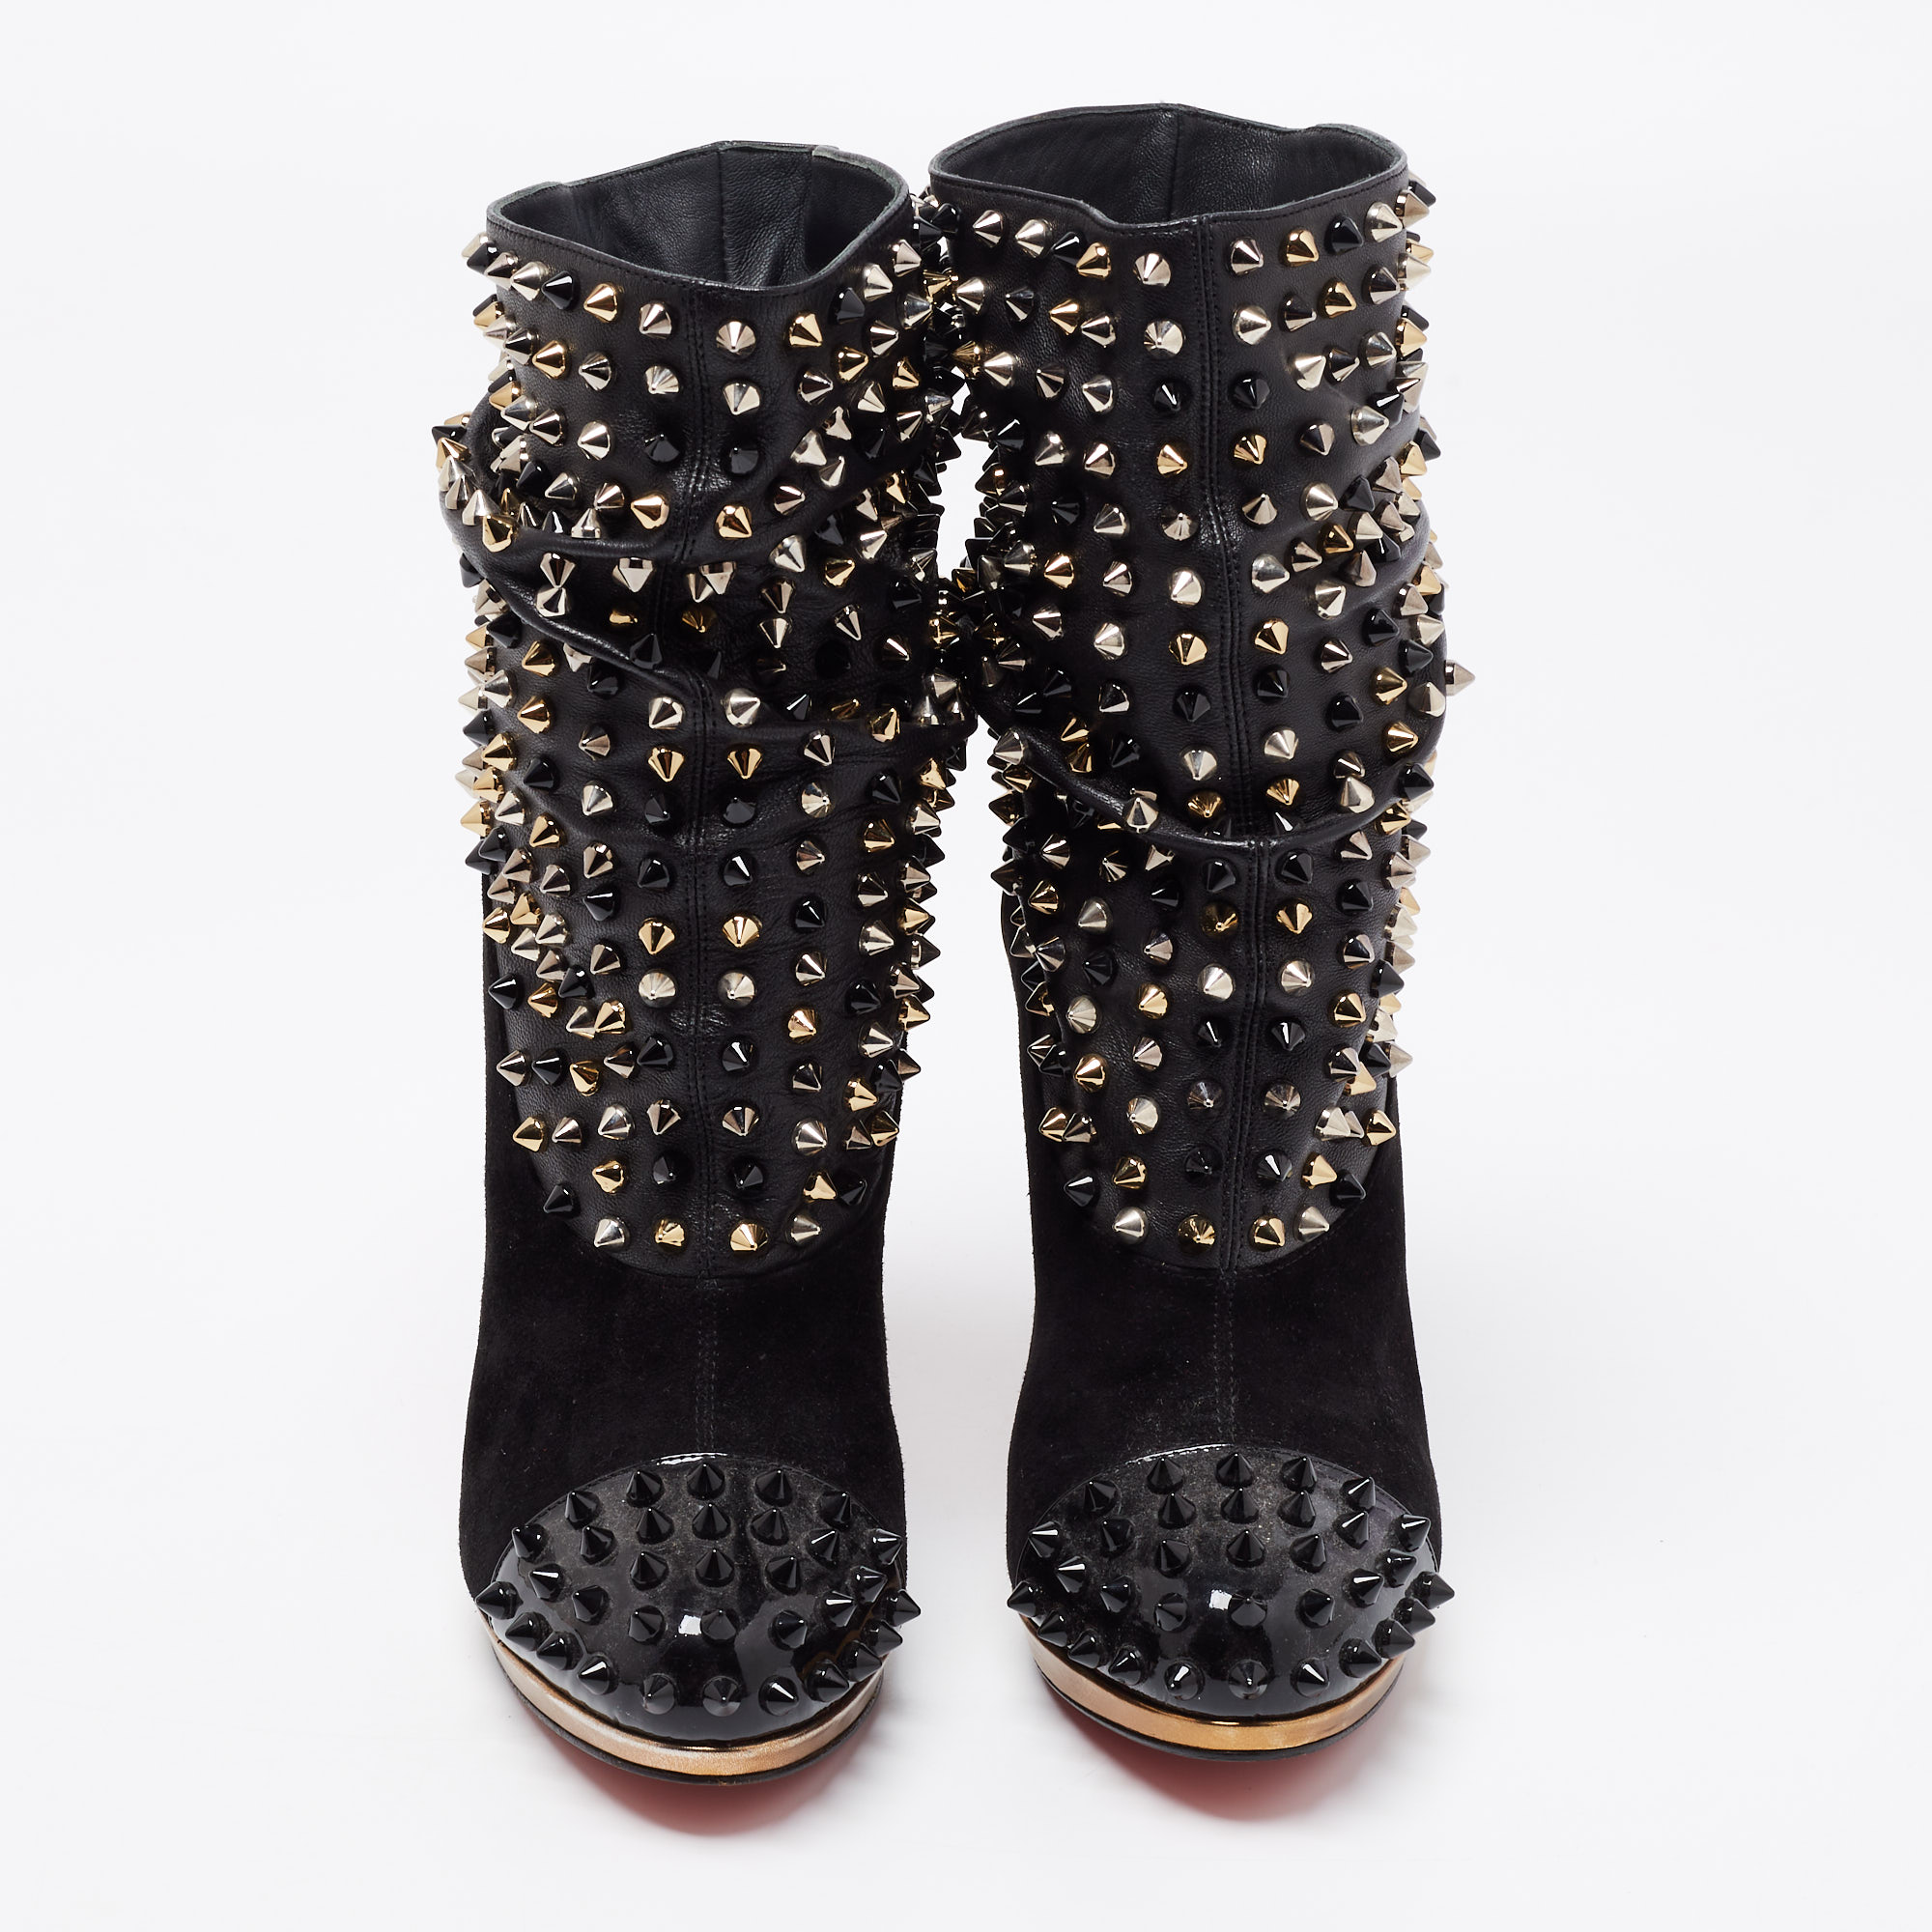 Christian Louboutin Black/Gold Suede, Patent And Leather Spike Wars Ankle Booties Size 35.5